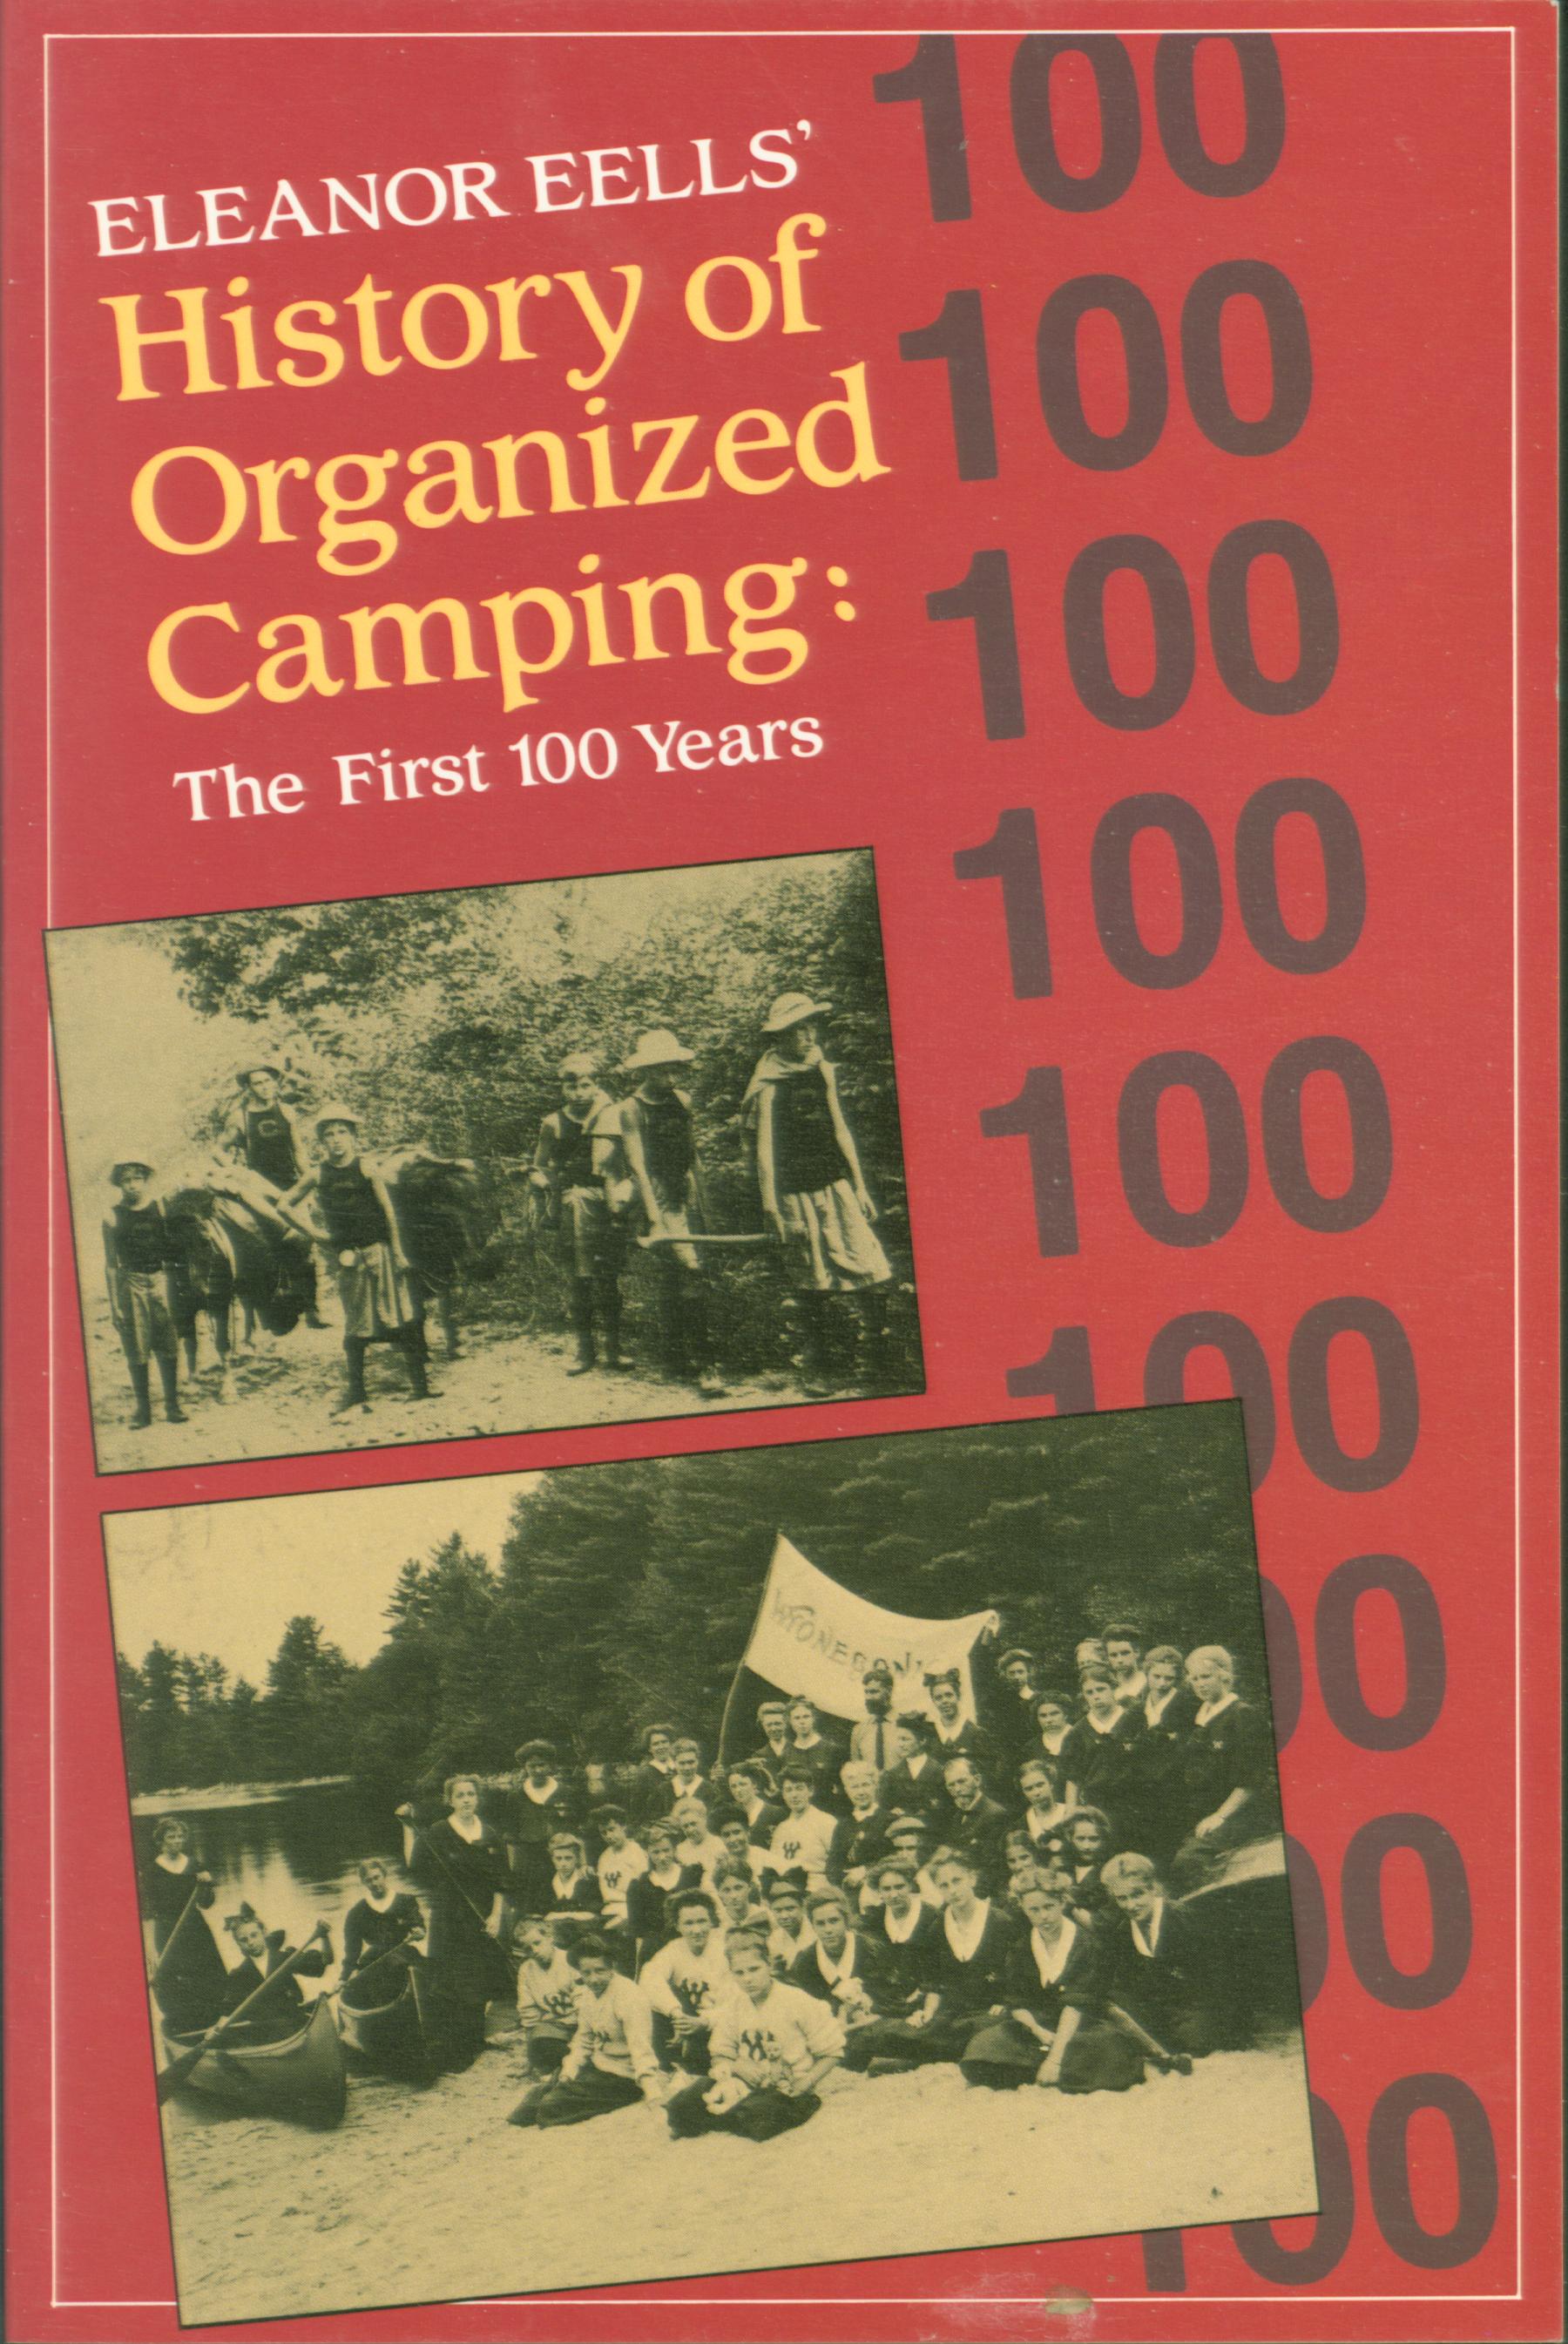 ELEANOR EELLS' HISTORY OF ORGANIZED CAMPING: the first 100 years.